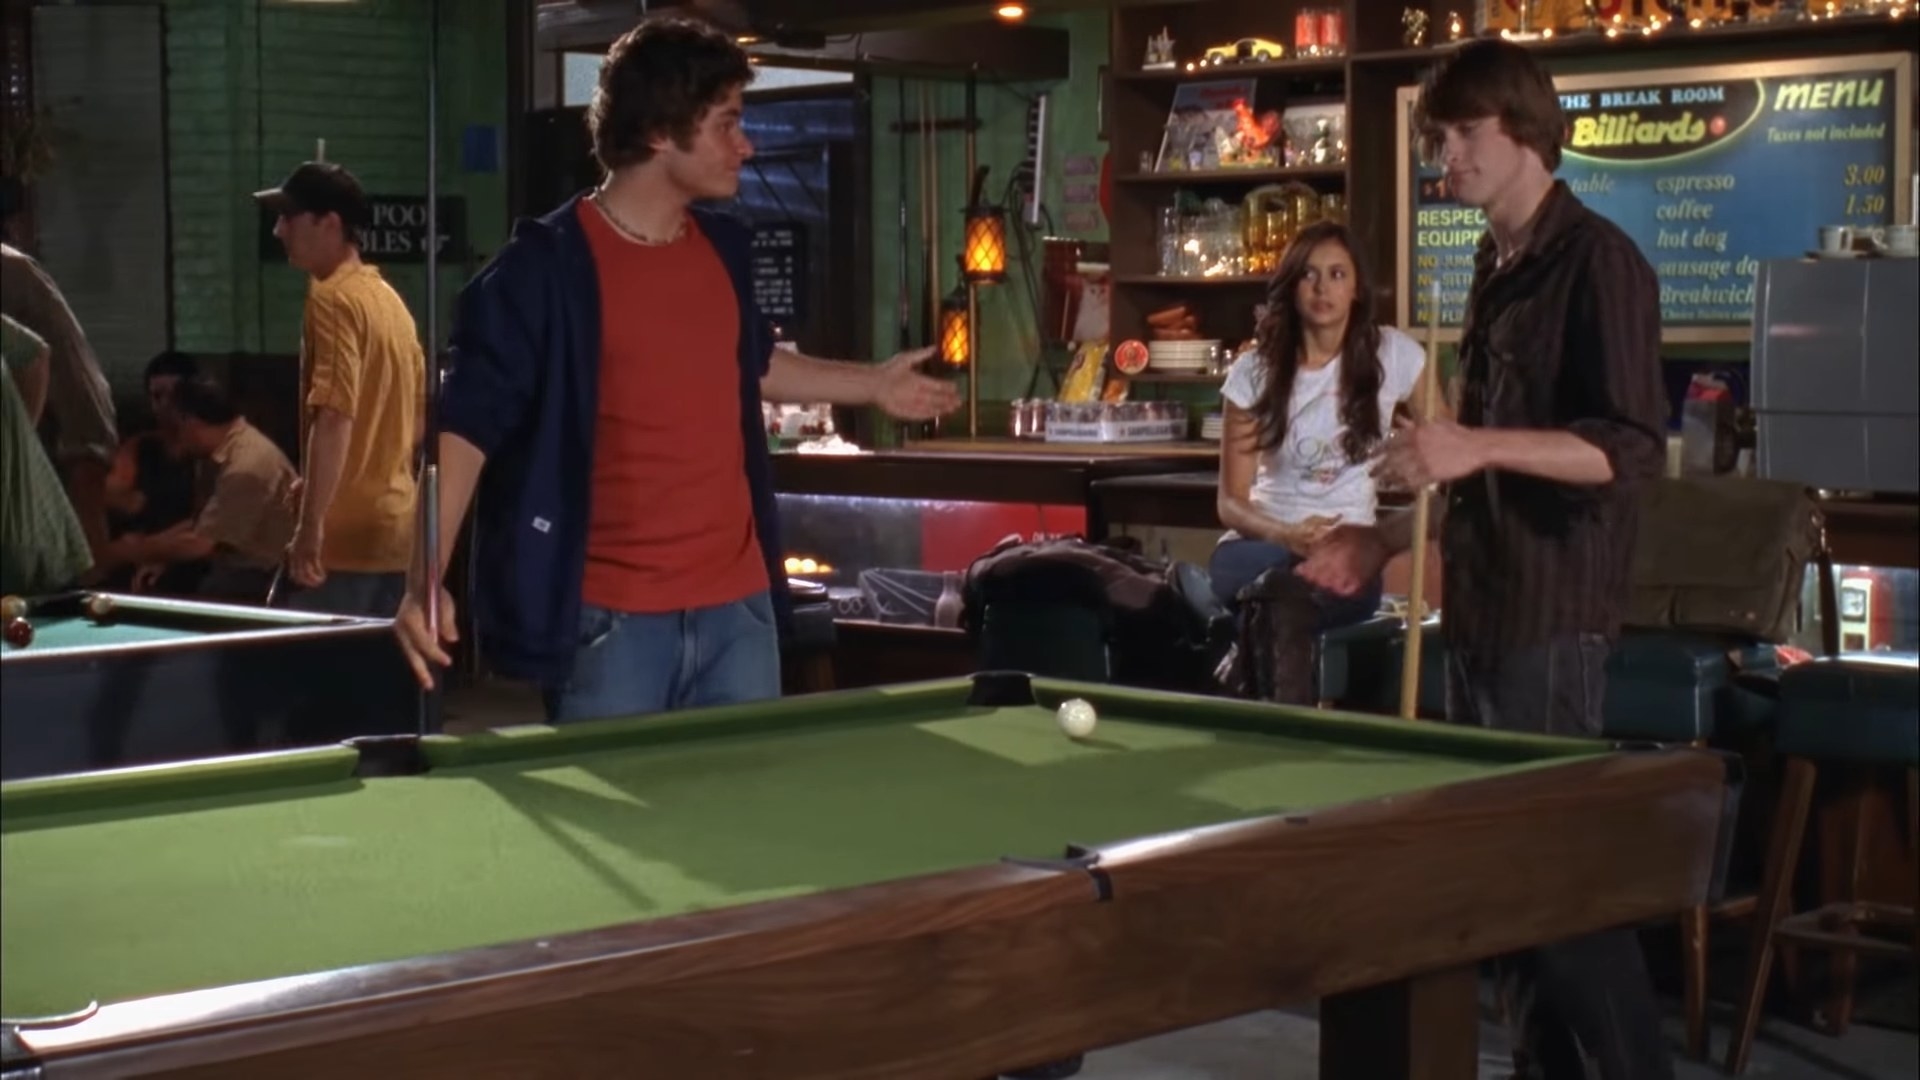 Peter and Riley play pool while Mia sits off to the side. Episode 805: &quot;Man With Two Hearts&quot;